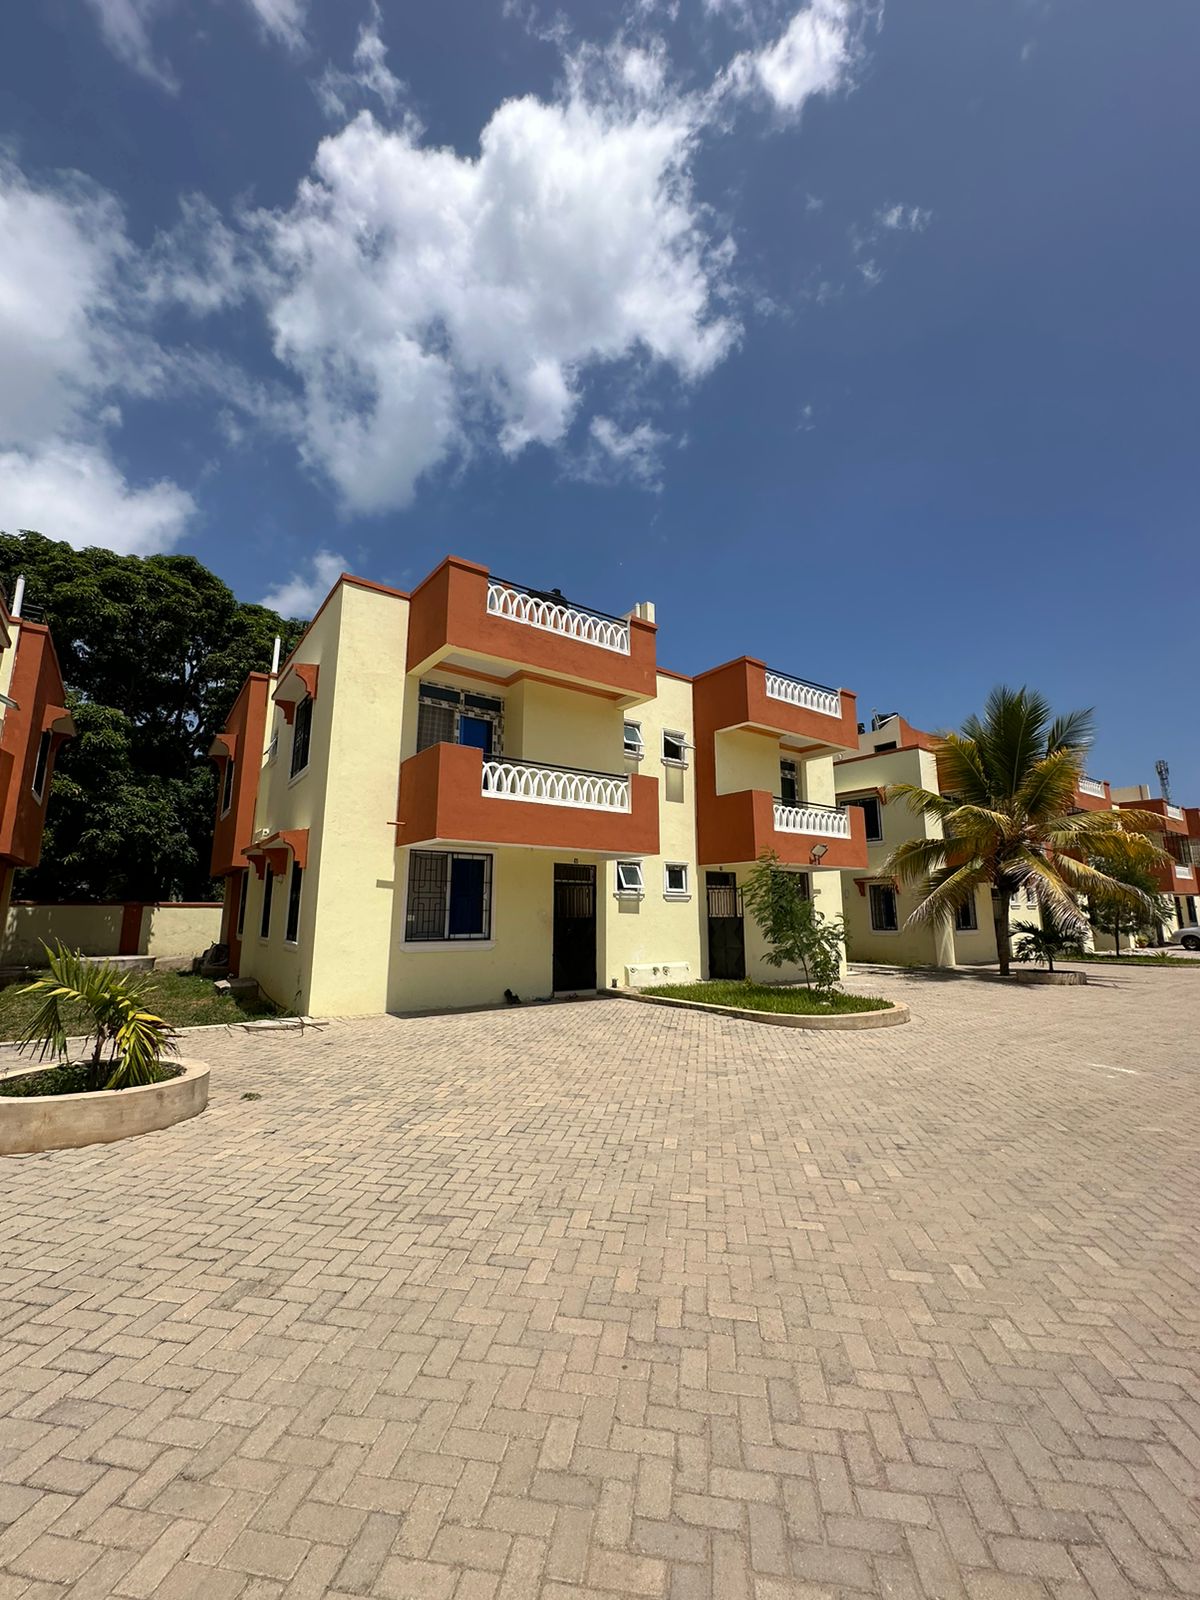 3 bedroom holiday homes for sale in Mtwapa Mzabaraoni. Gated community with 50 units. Ready for occupation. Price: Ksh 8.5million Musilli Homes